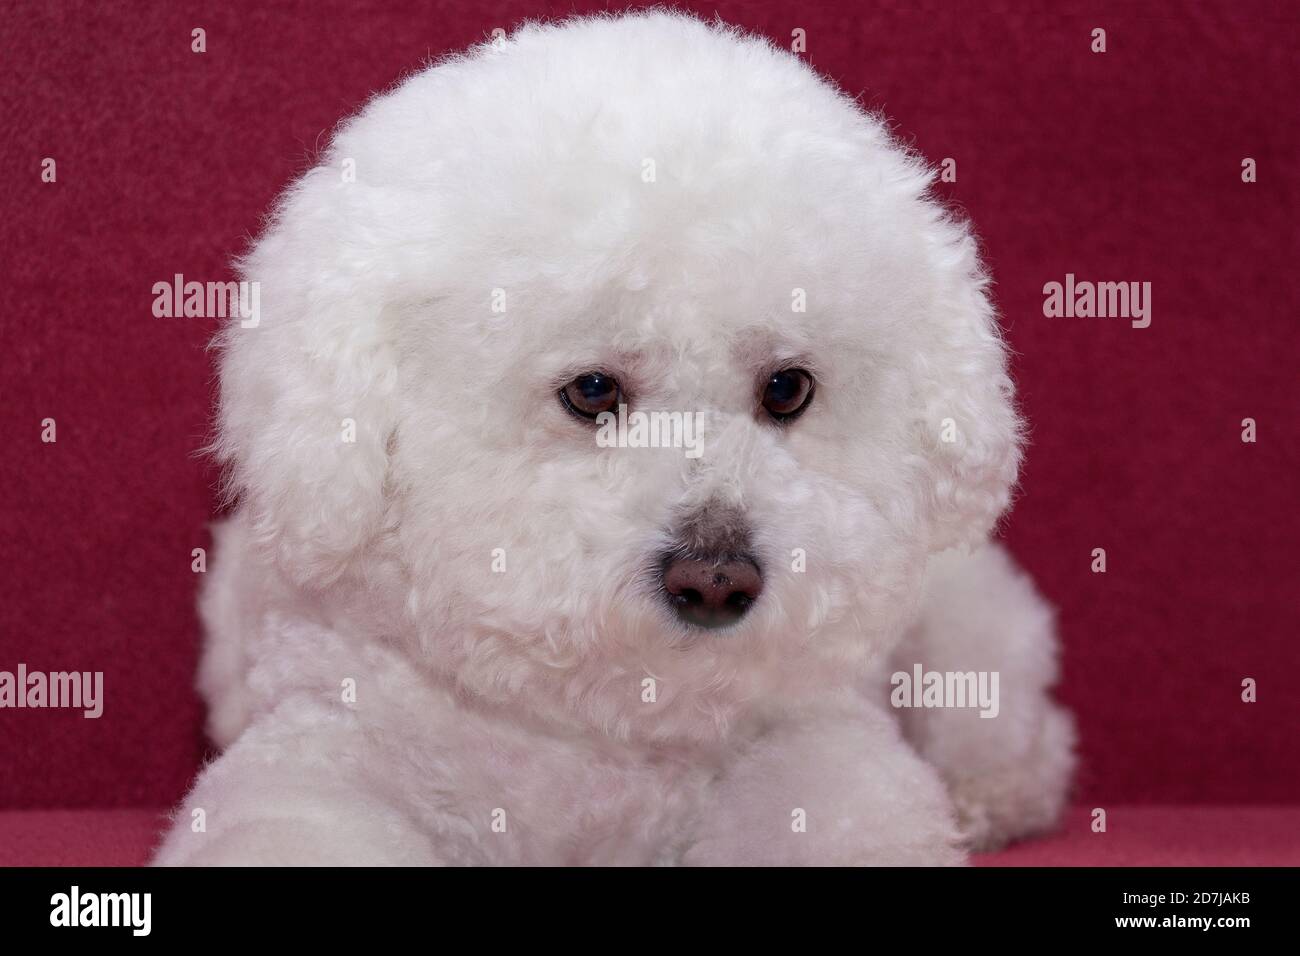 Cute bichon frise is lying on a vinous couch. Pet animals. Stock Photo